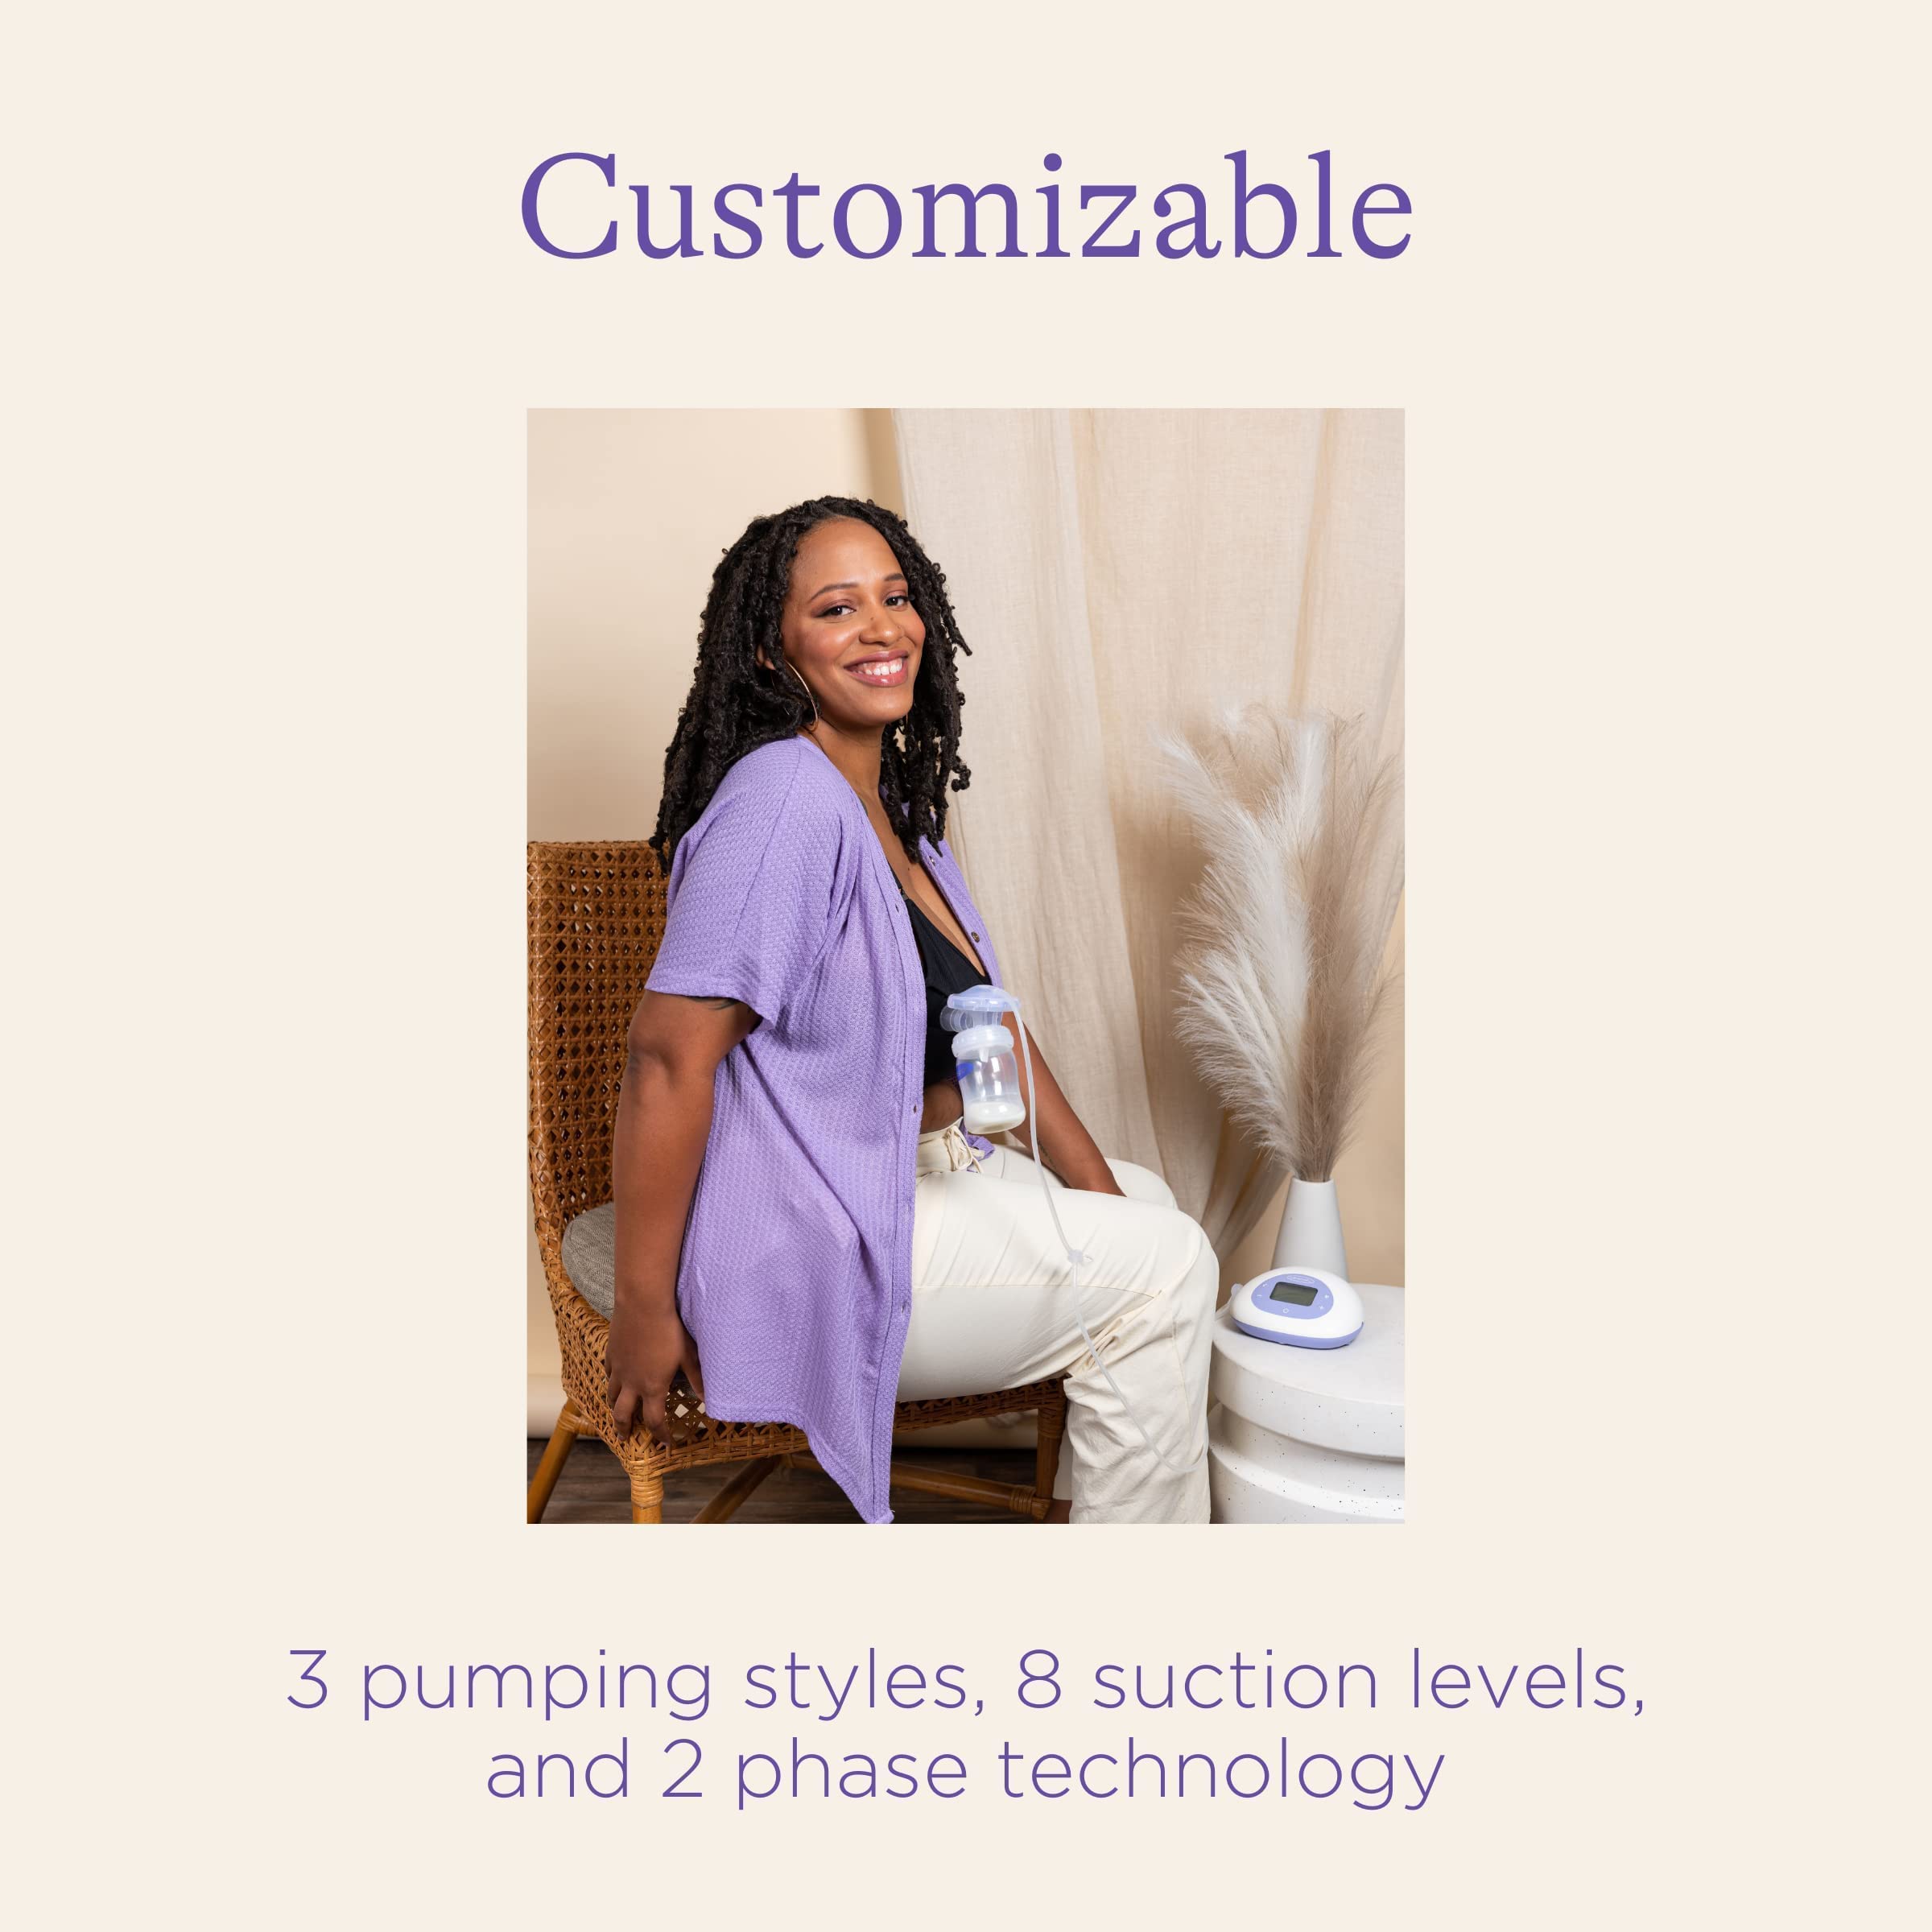 Lansinoh Signature Pro Double Electric Breast Pump, Portable Breast Pump, 3 Power Options, LCD Display, Includes Breast Pump Bag, 25mm Breast Pump Flanges and 2 Lansinoh Baby Bottles